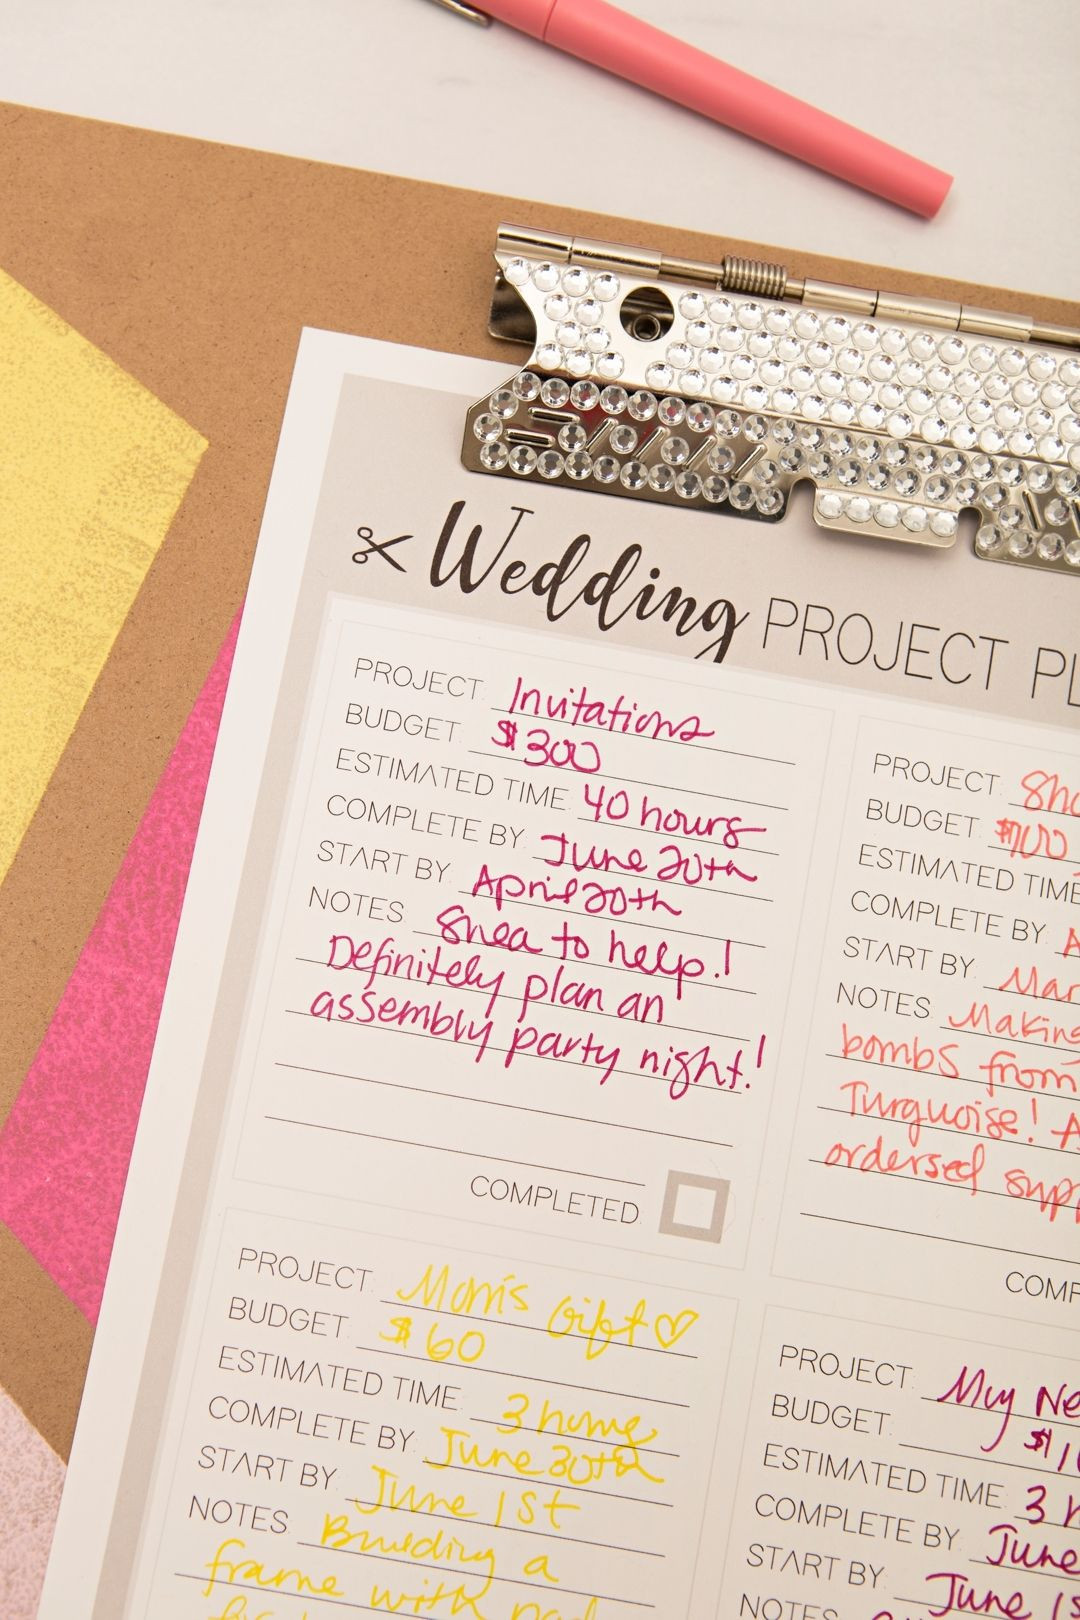 DIY Wedding Planning Binder
 Print Out Out This DIY "Wedding Project Planner Sheet" For